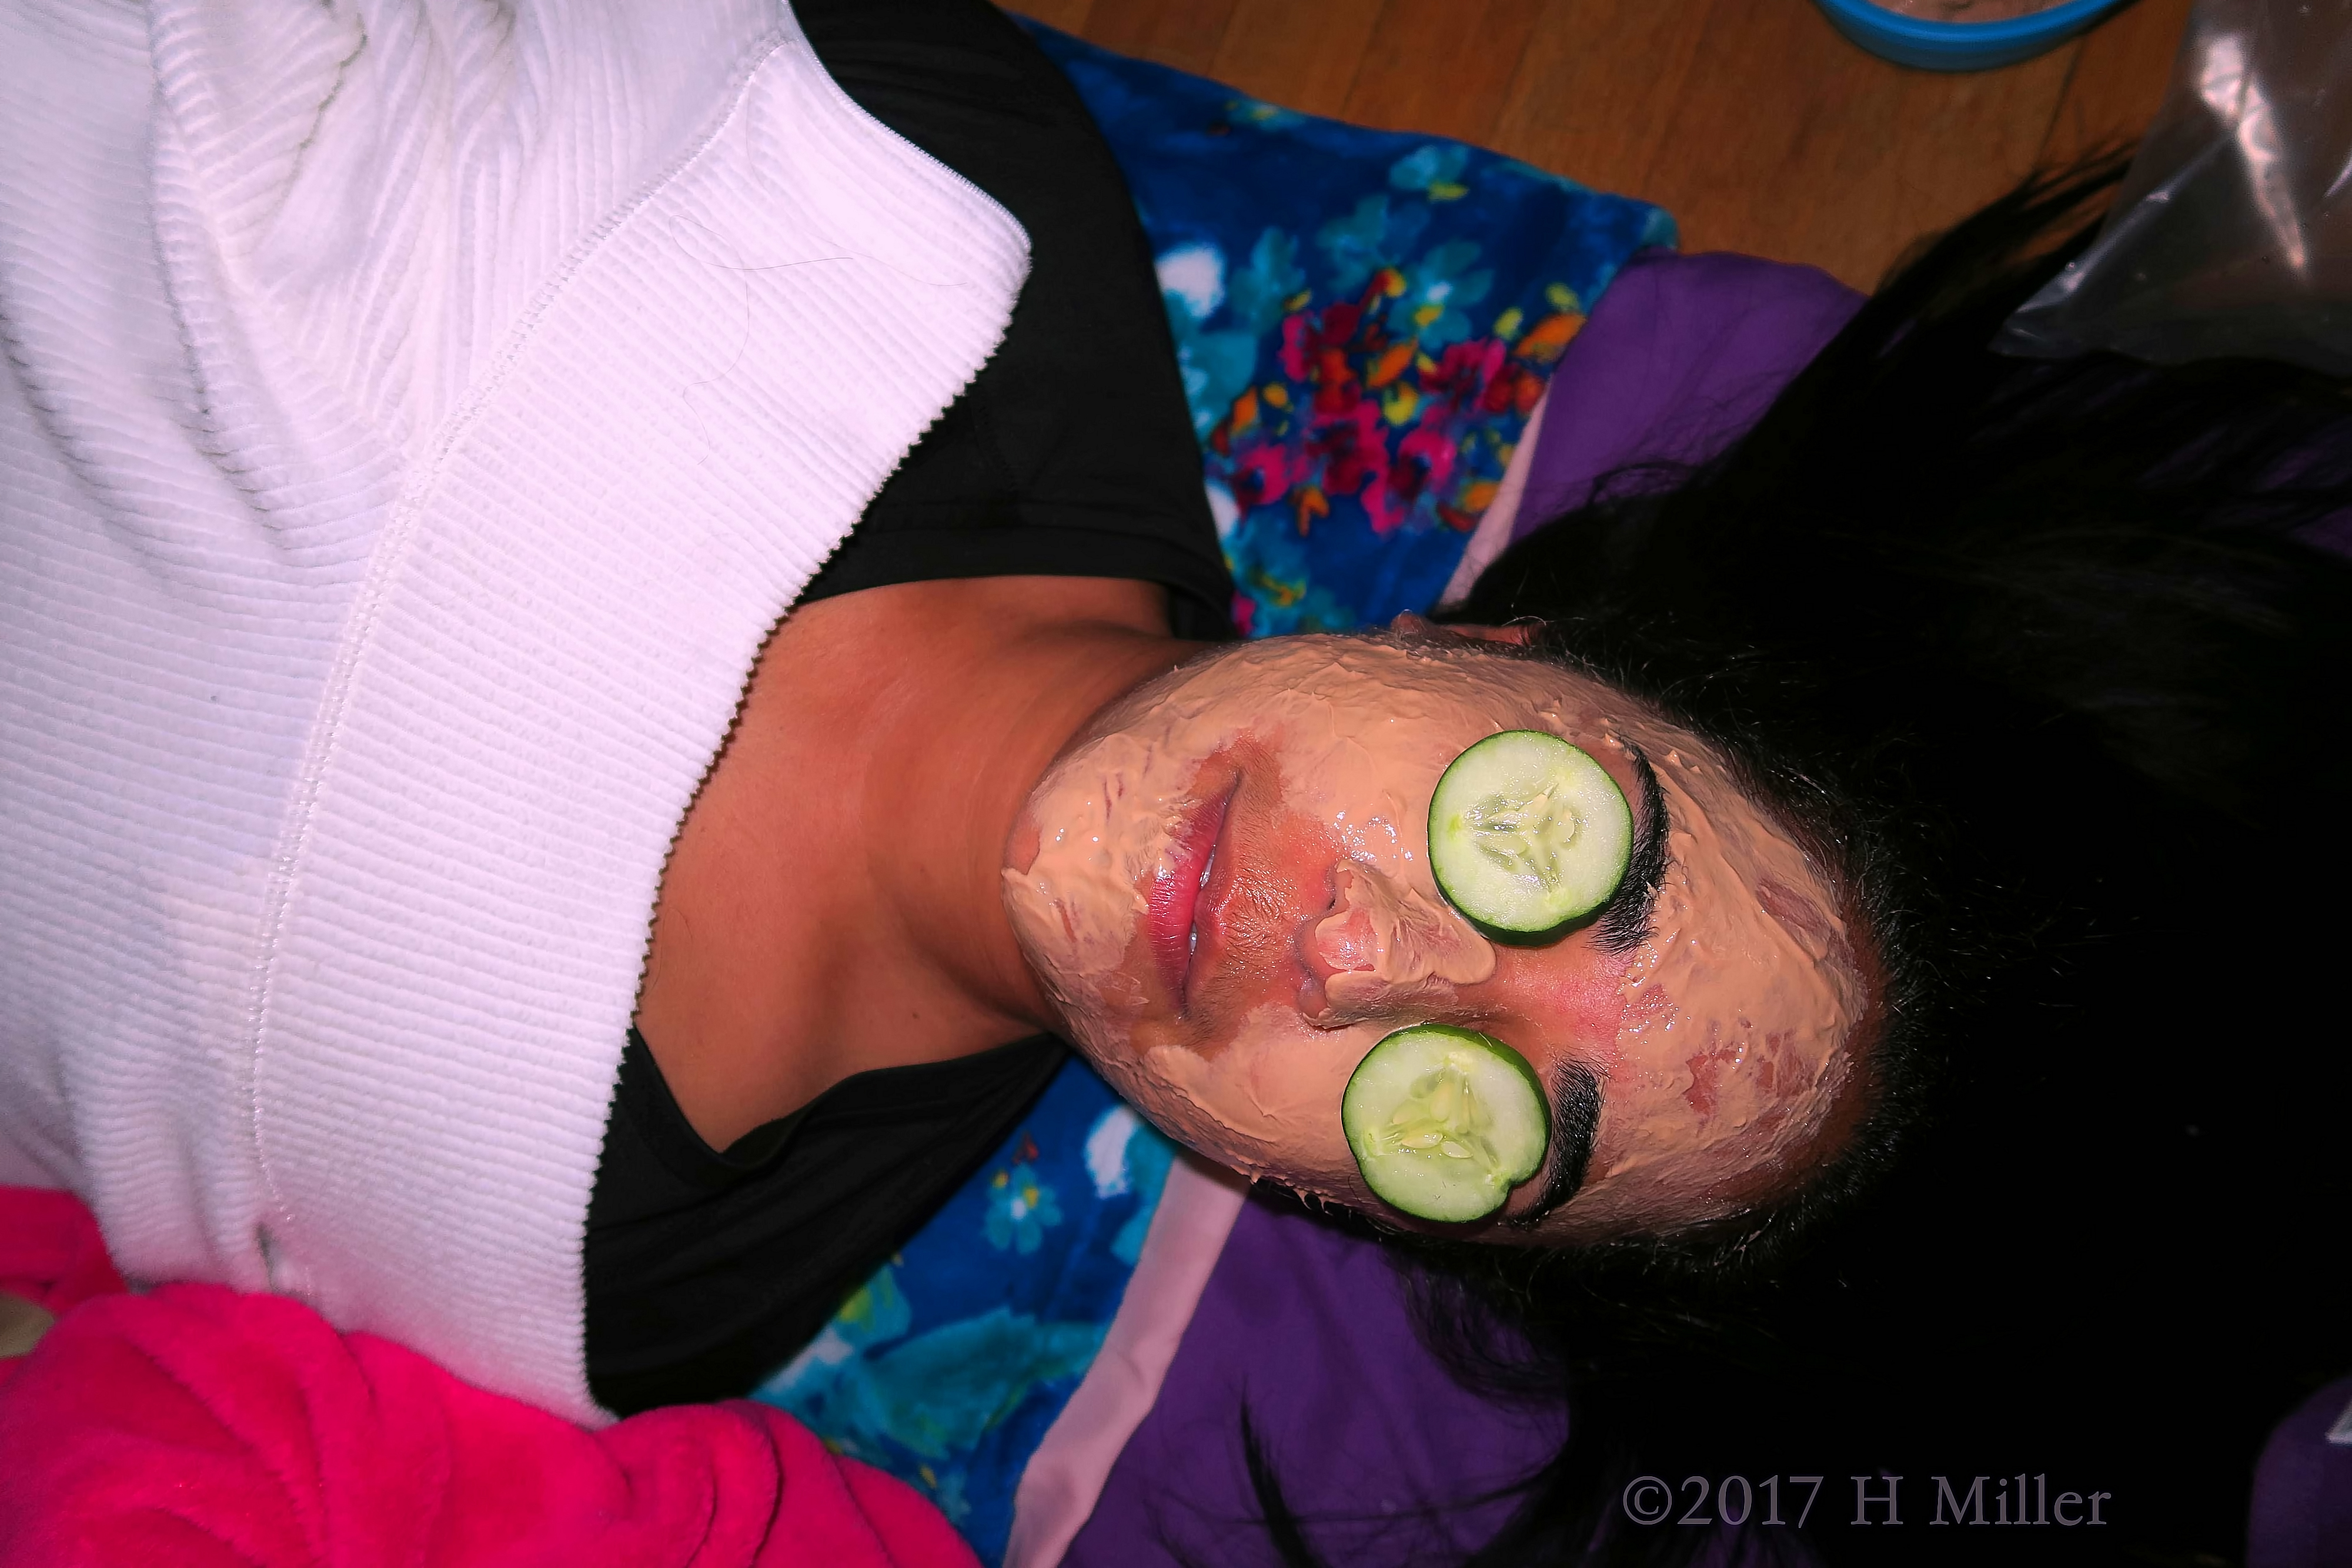 Her Facial Masque Is On With Cukes On Her Eyes! 